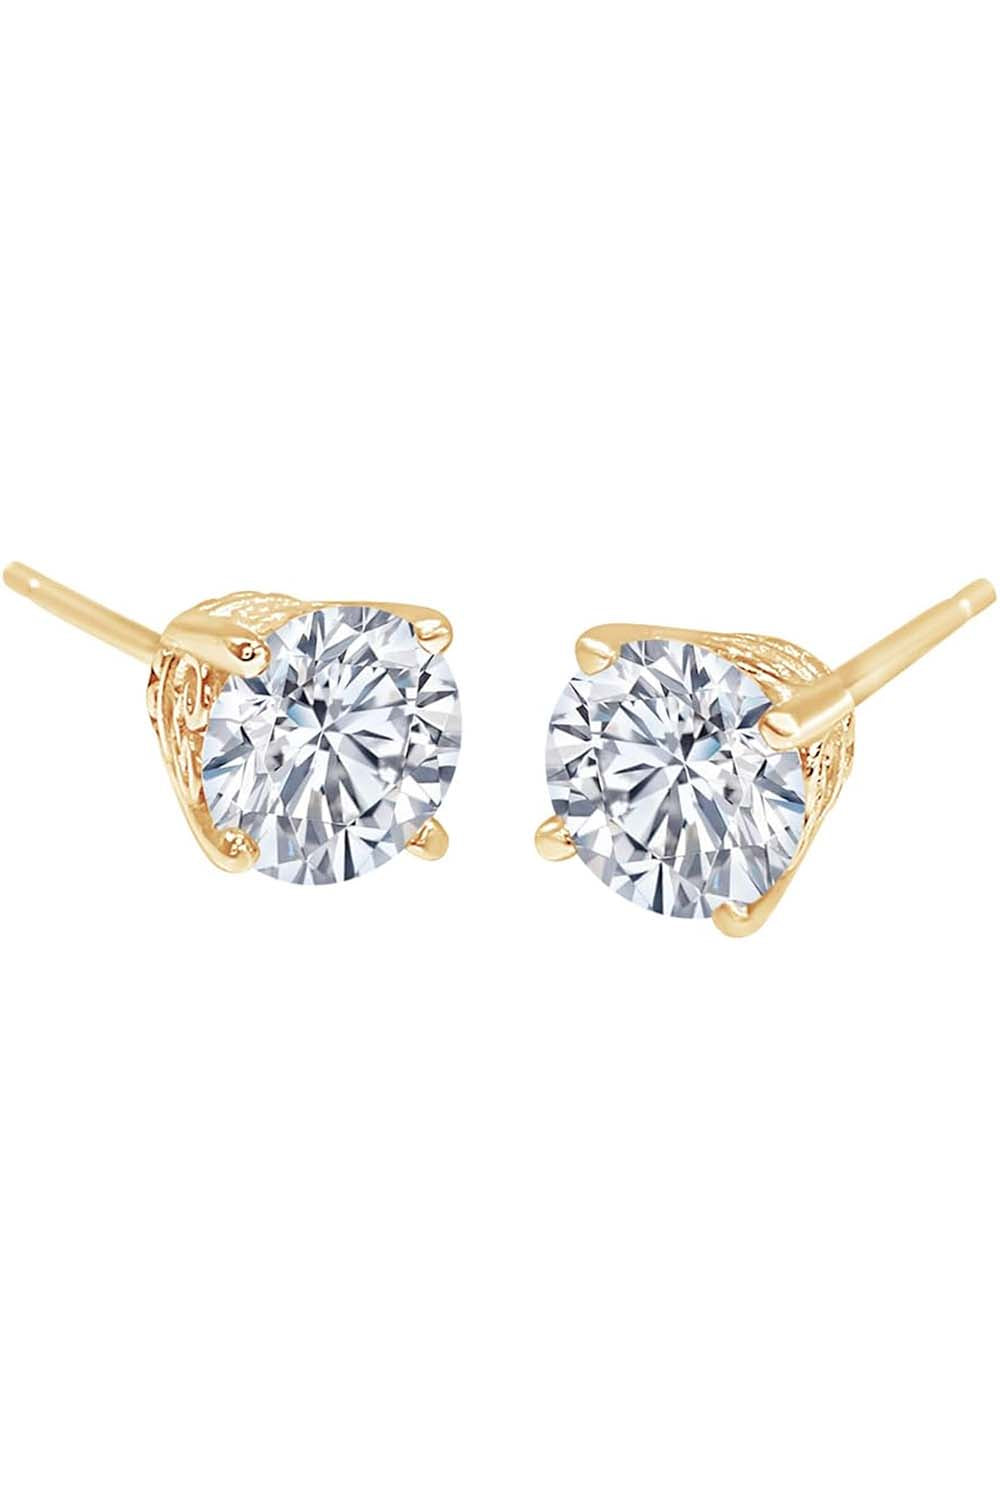 Yellow Gold Color Vintage Solitaire Stud Earrings for Women